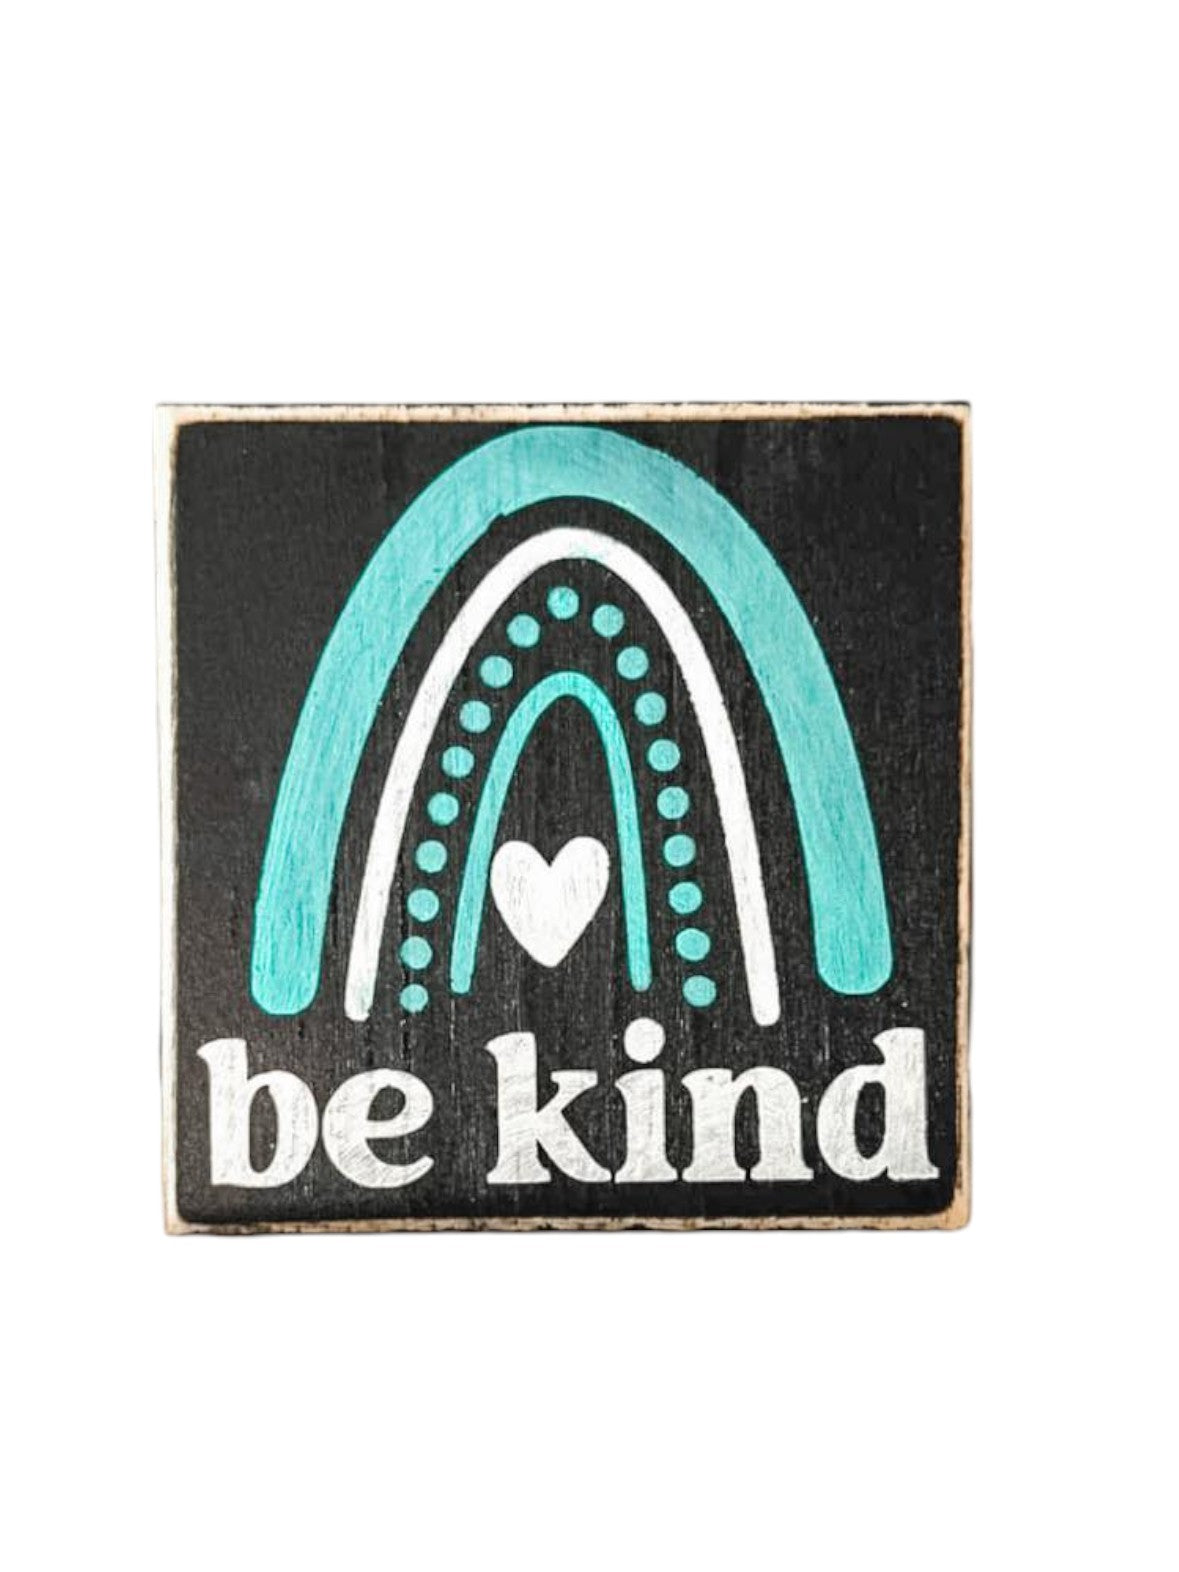 Be Kind" Wood Block Sign: Hand-painted white text on black background with rainbow accent, 4.5"x4.5". Ideal for spreading positivity.